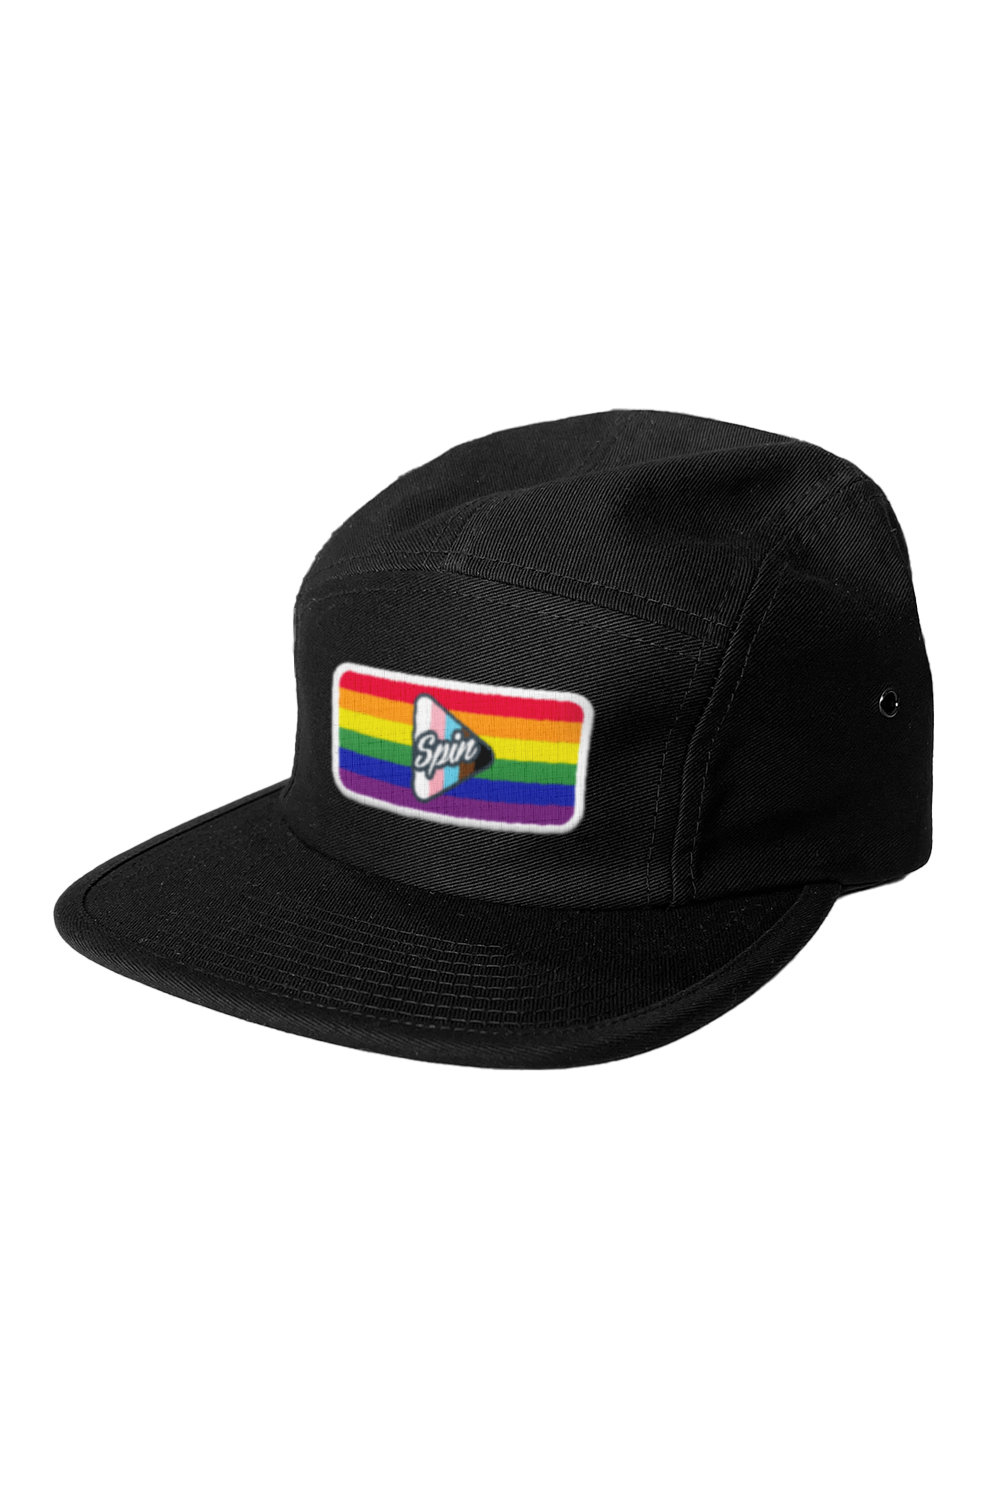 Ultimate Frisbee Hats - 5 Panel & More Hats